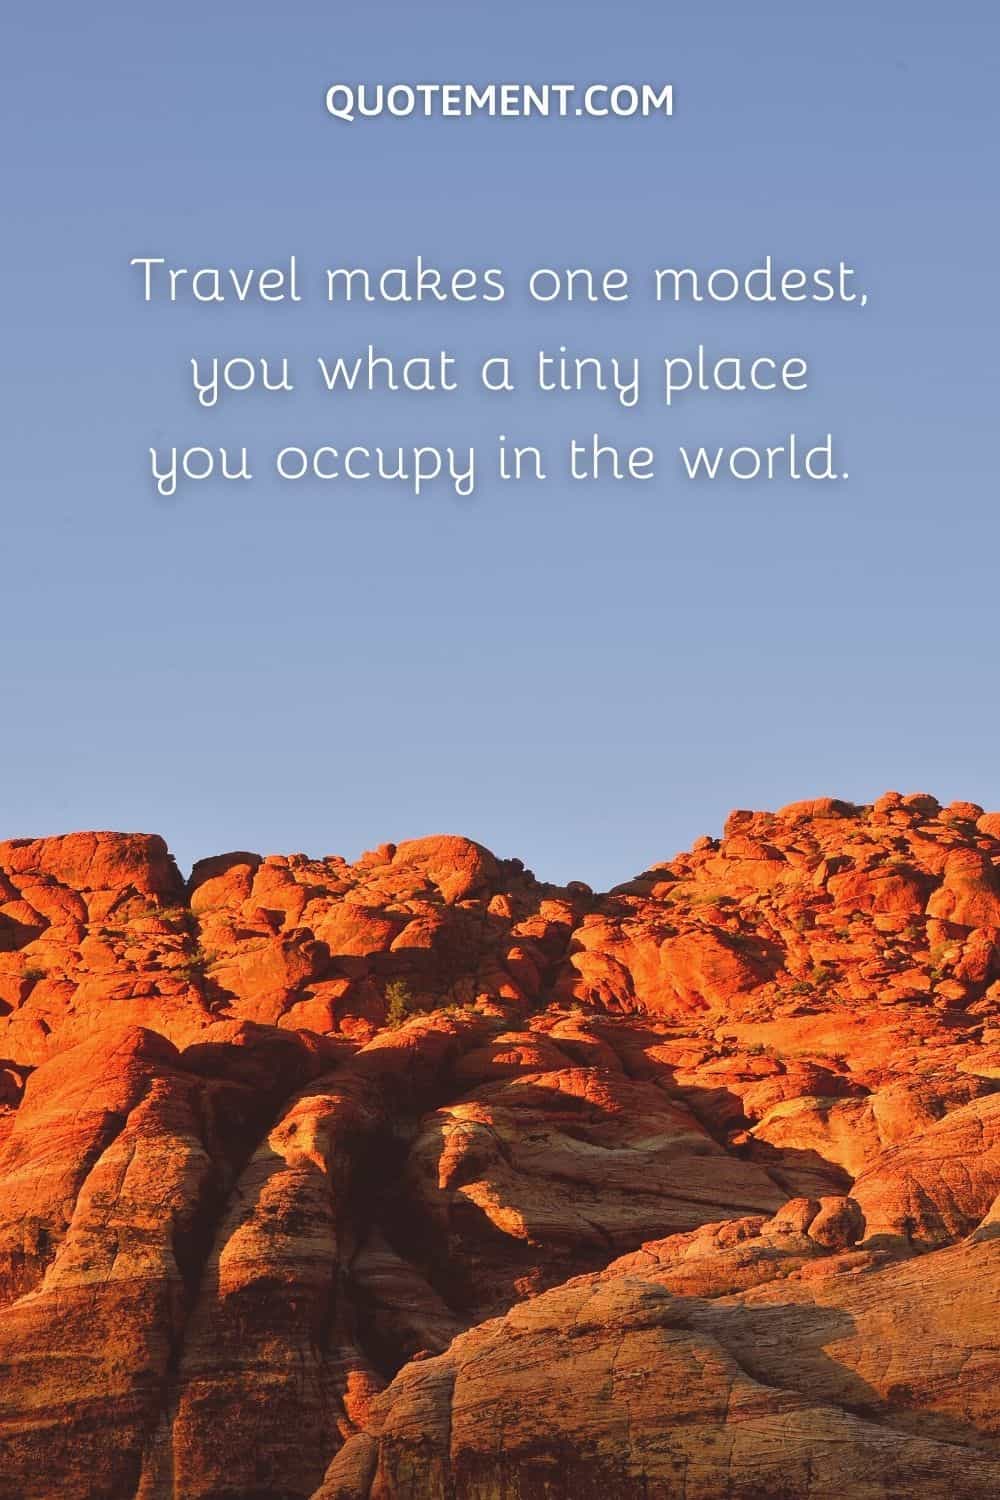 Travel makes one modest, you what a tiny place you occupy in the world.